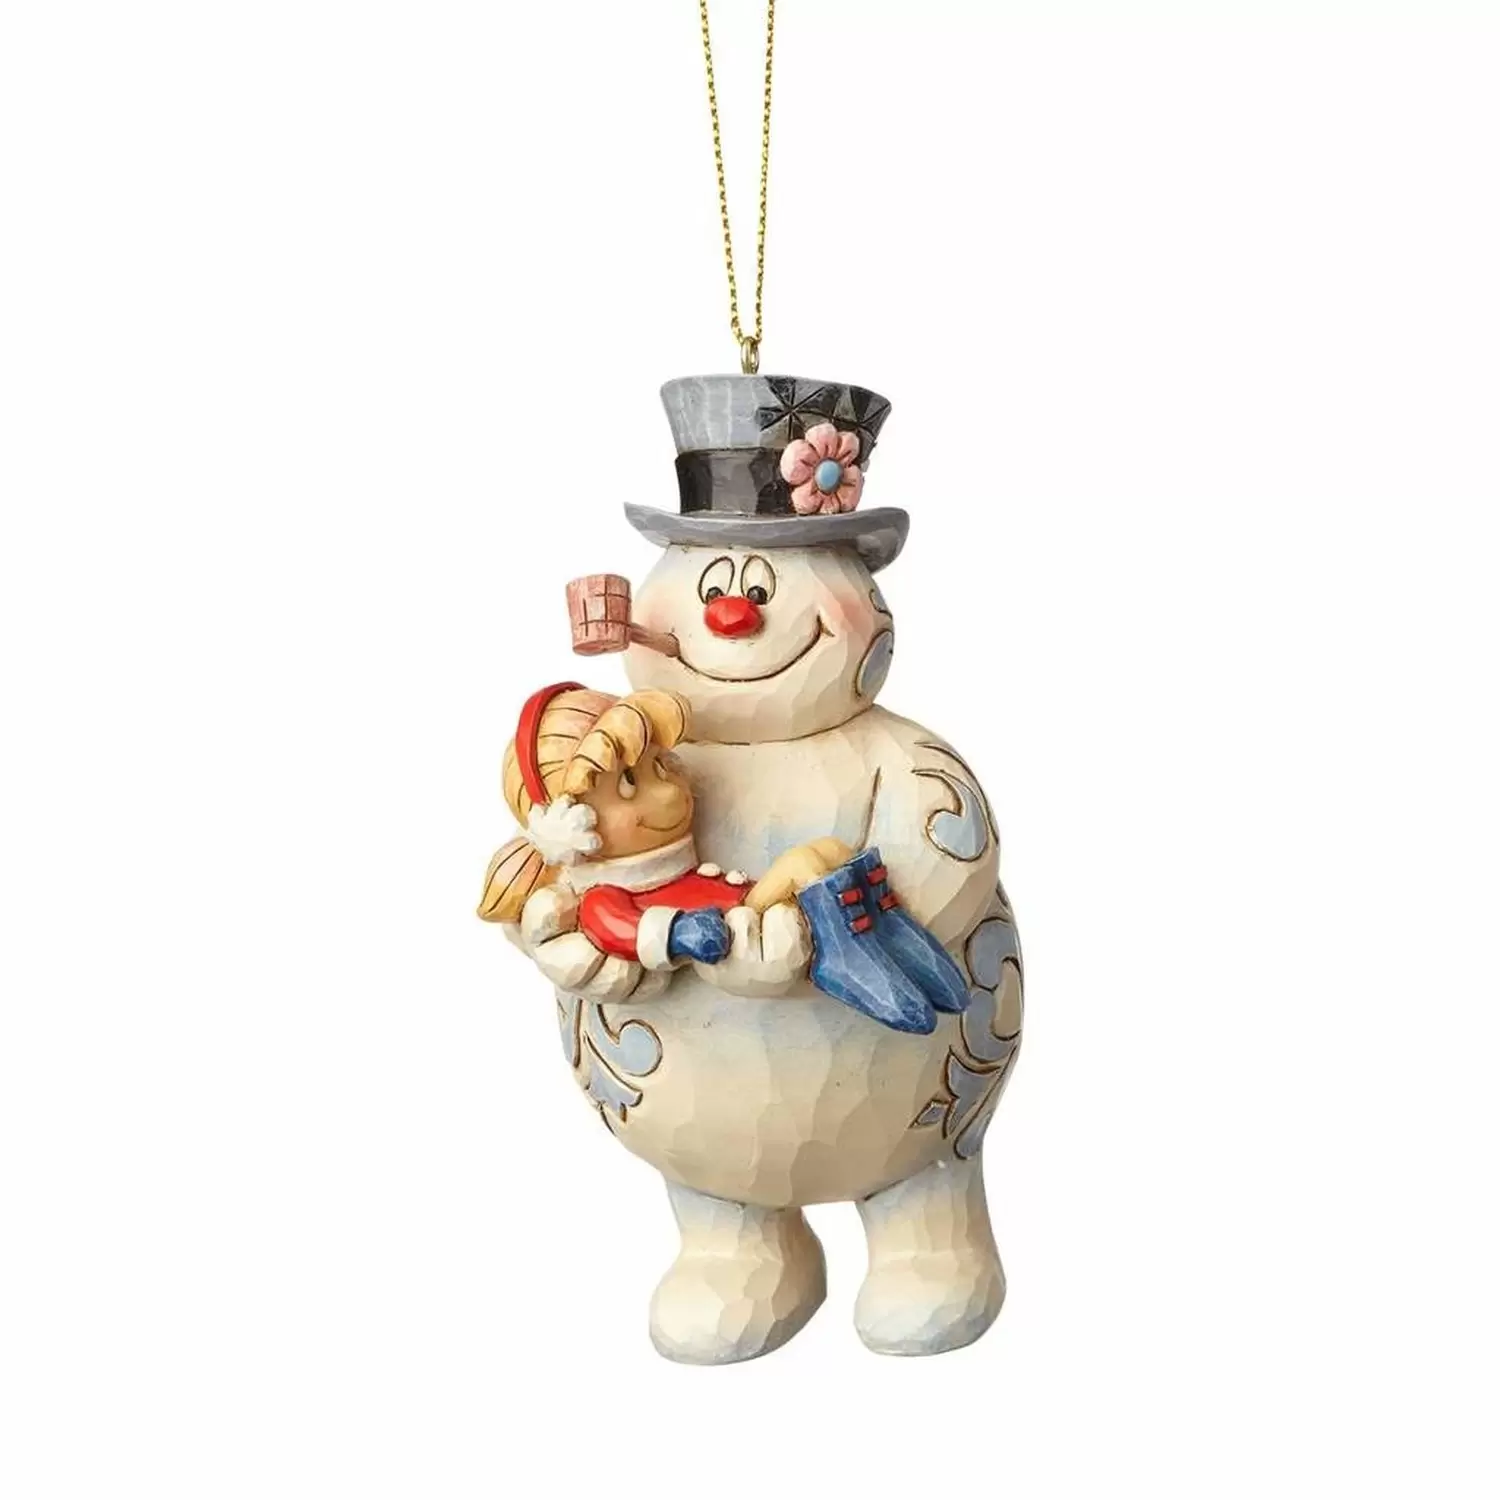 Cartoons Characters by Jim Shore - Frosty Holding Karen Hanging Ornament